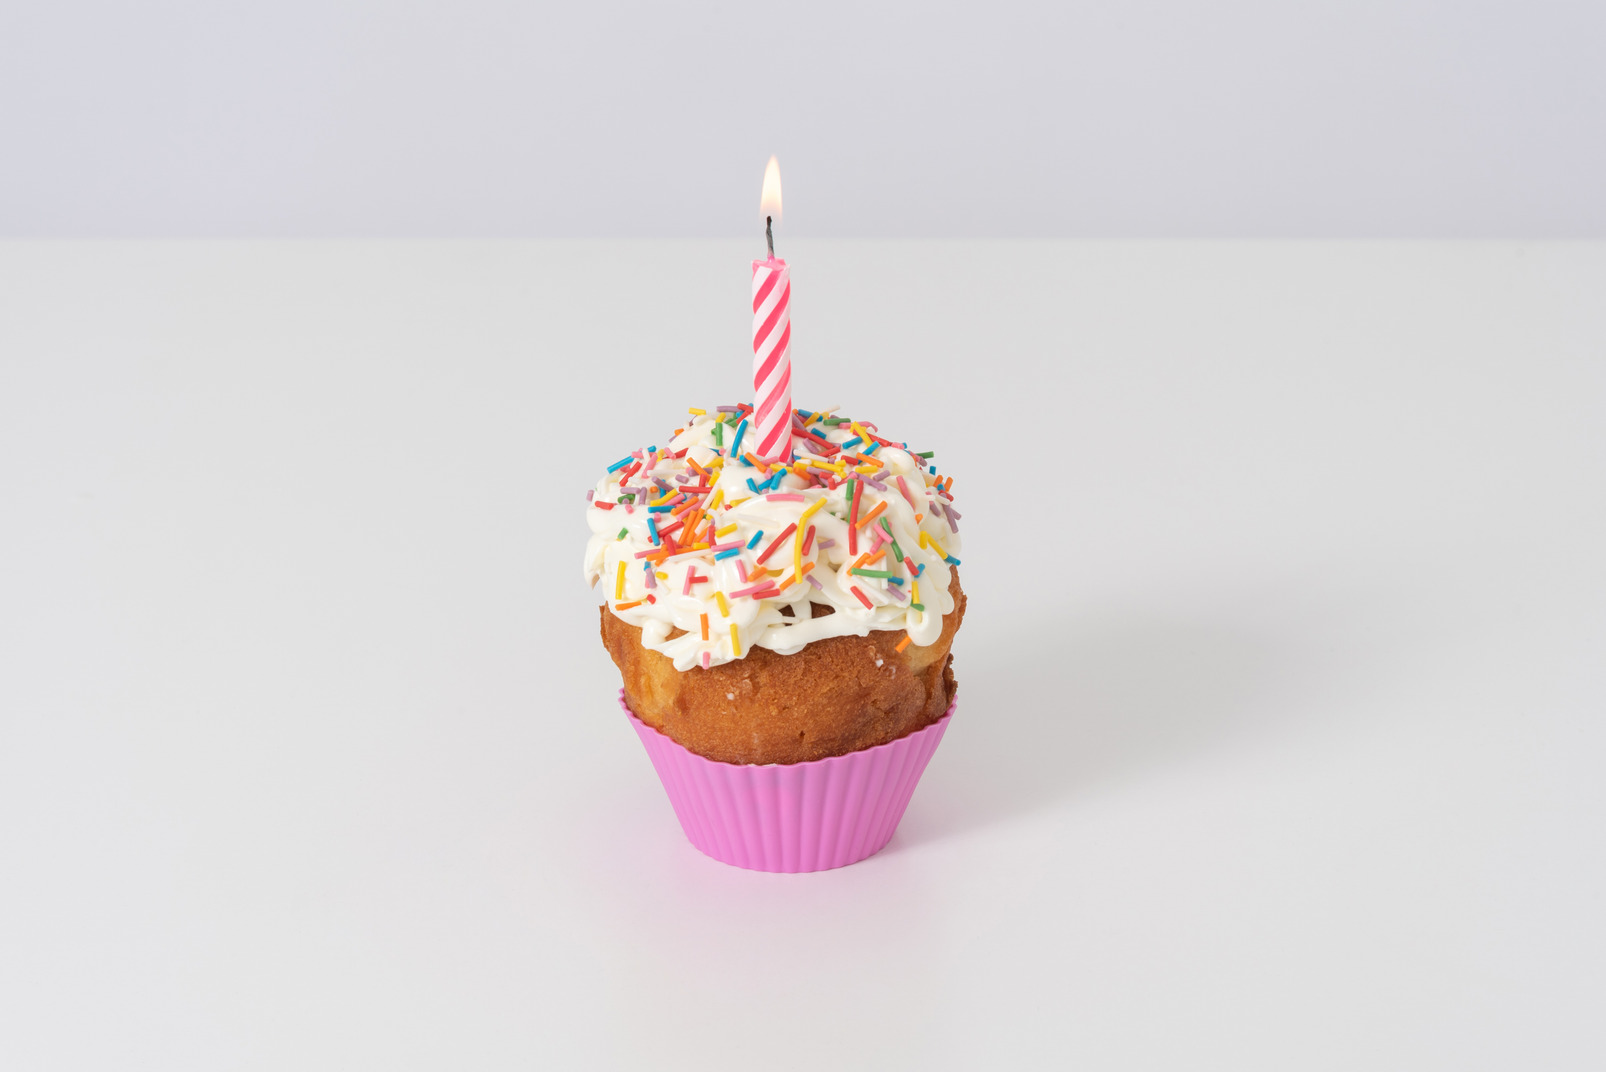 Cupcake with a candle on a white background